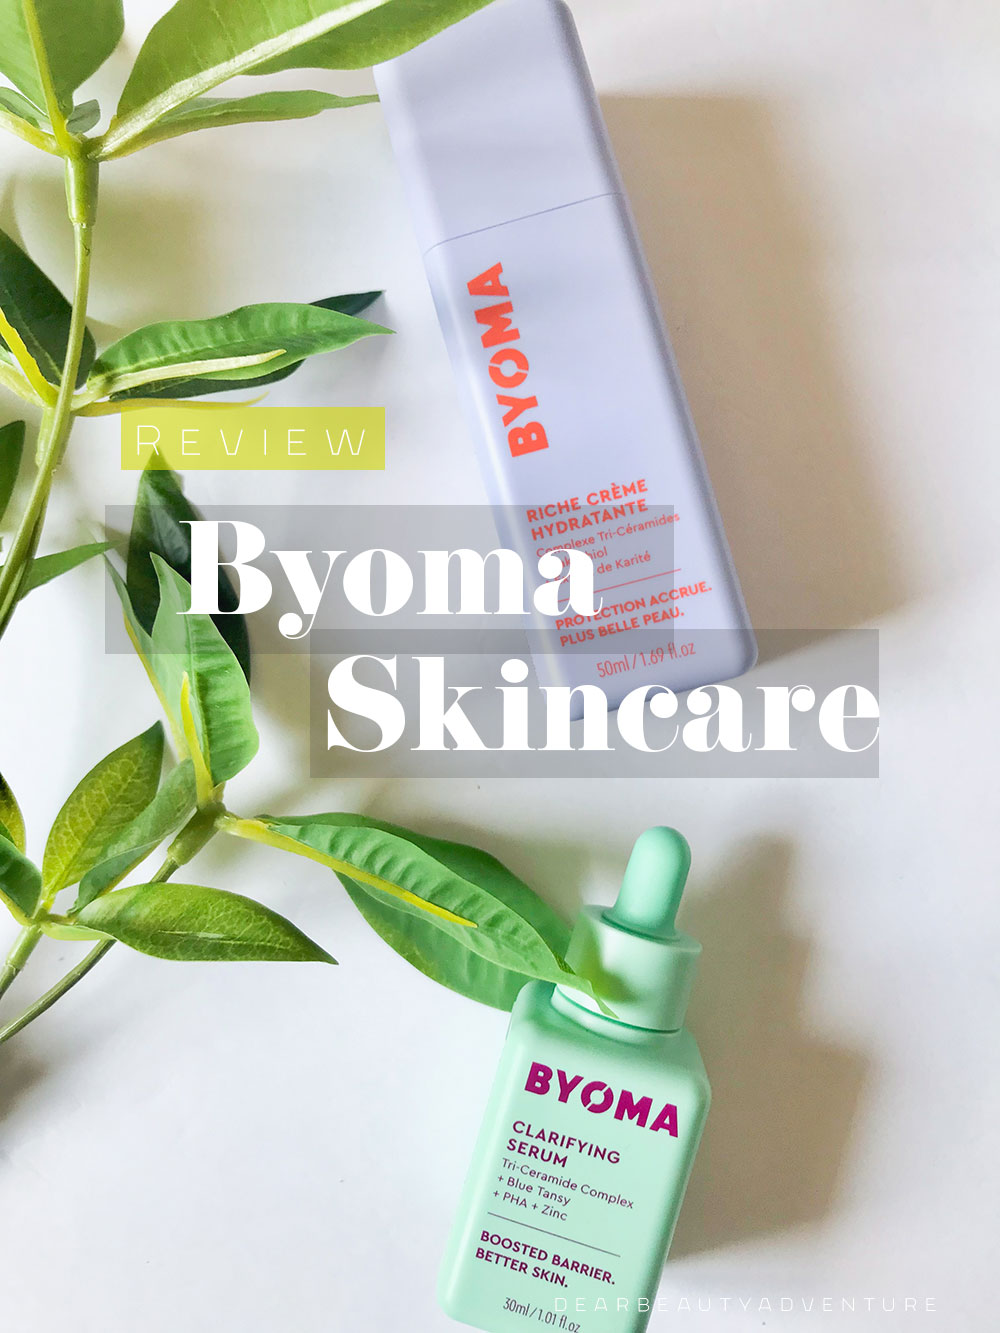 Byoma Skincare Review as a Asian Skincare lover - Dear Beauty Adventure